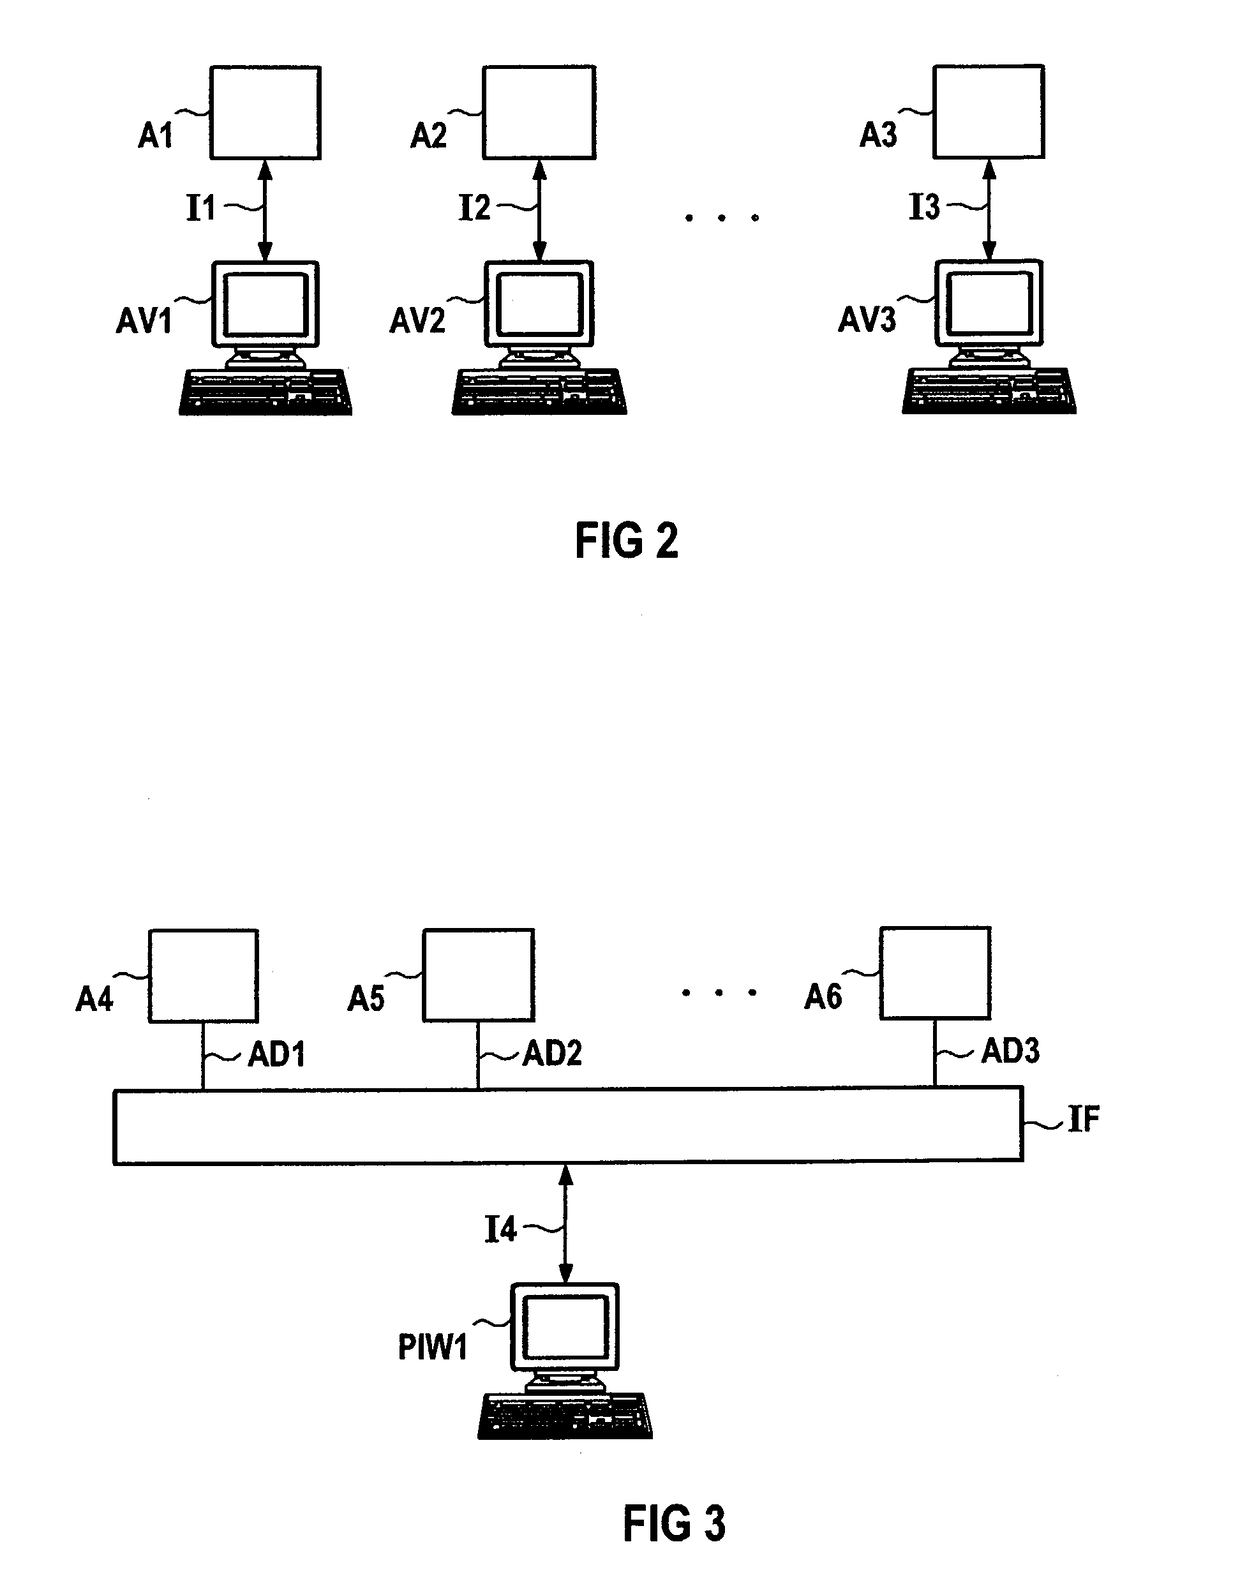 System and method for managing software applications, particularly manufacturing execution system (MES) applications